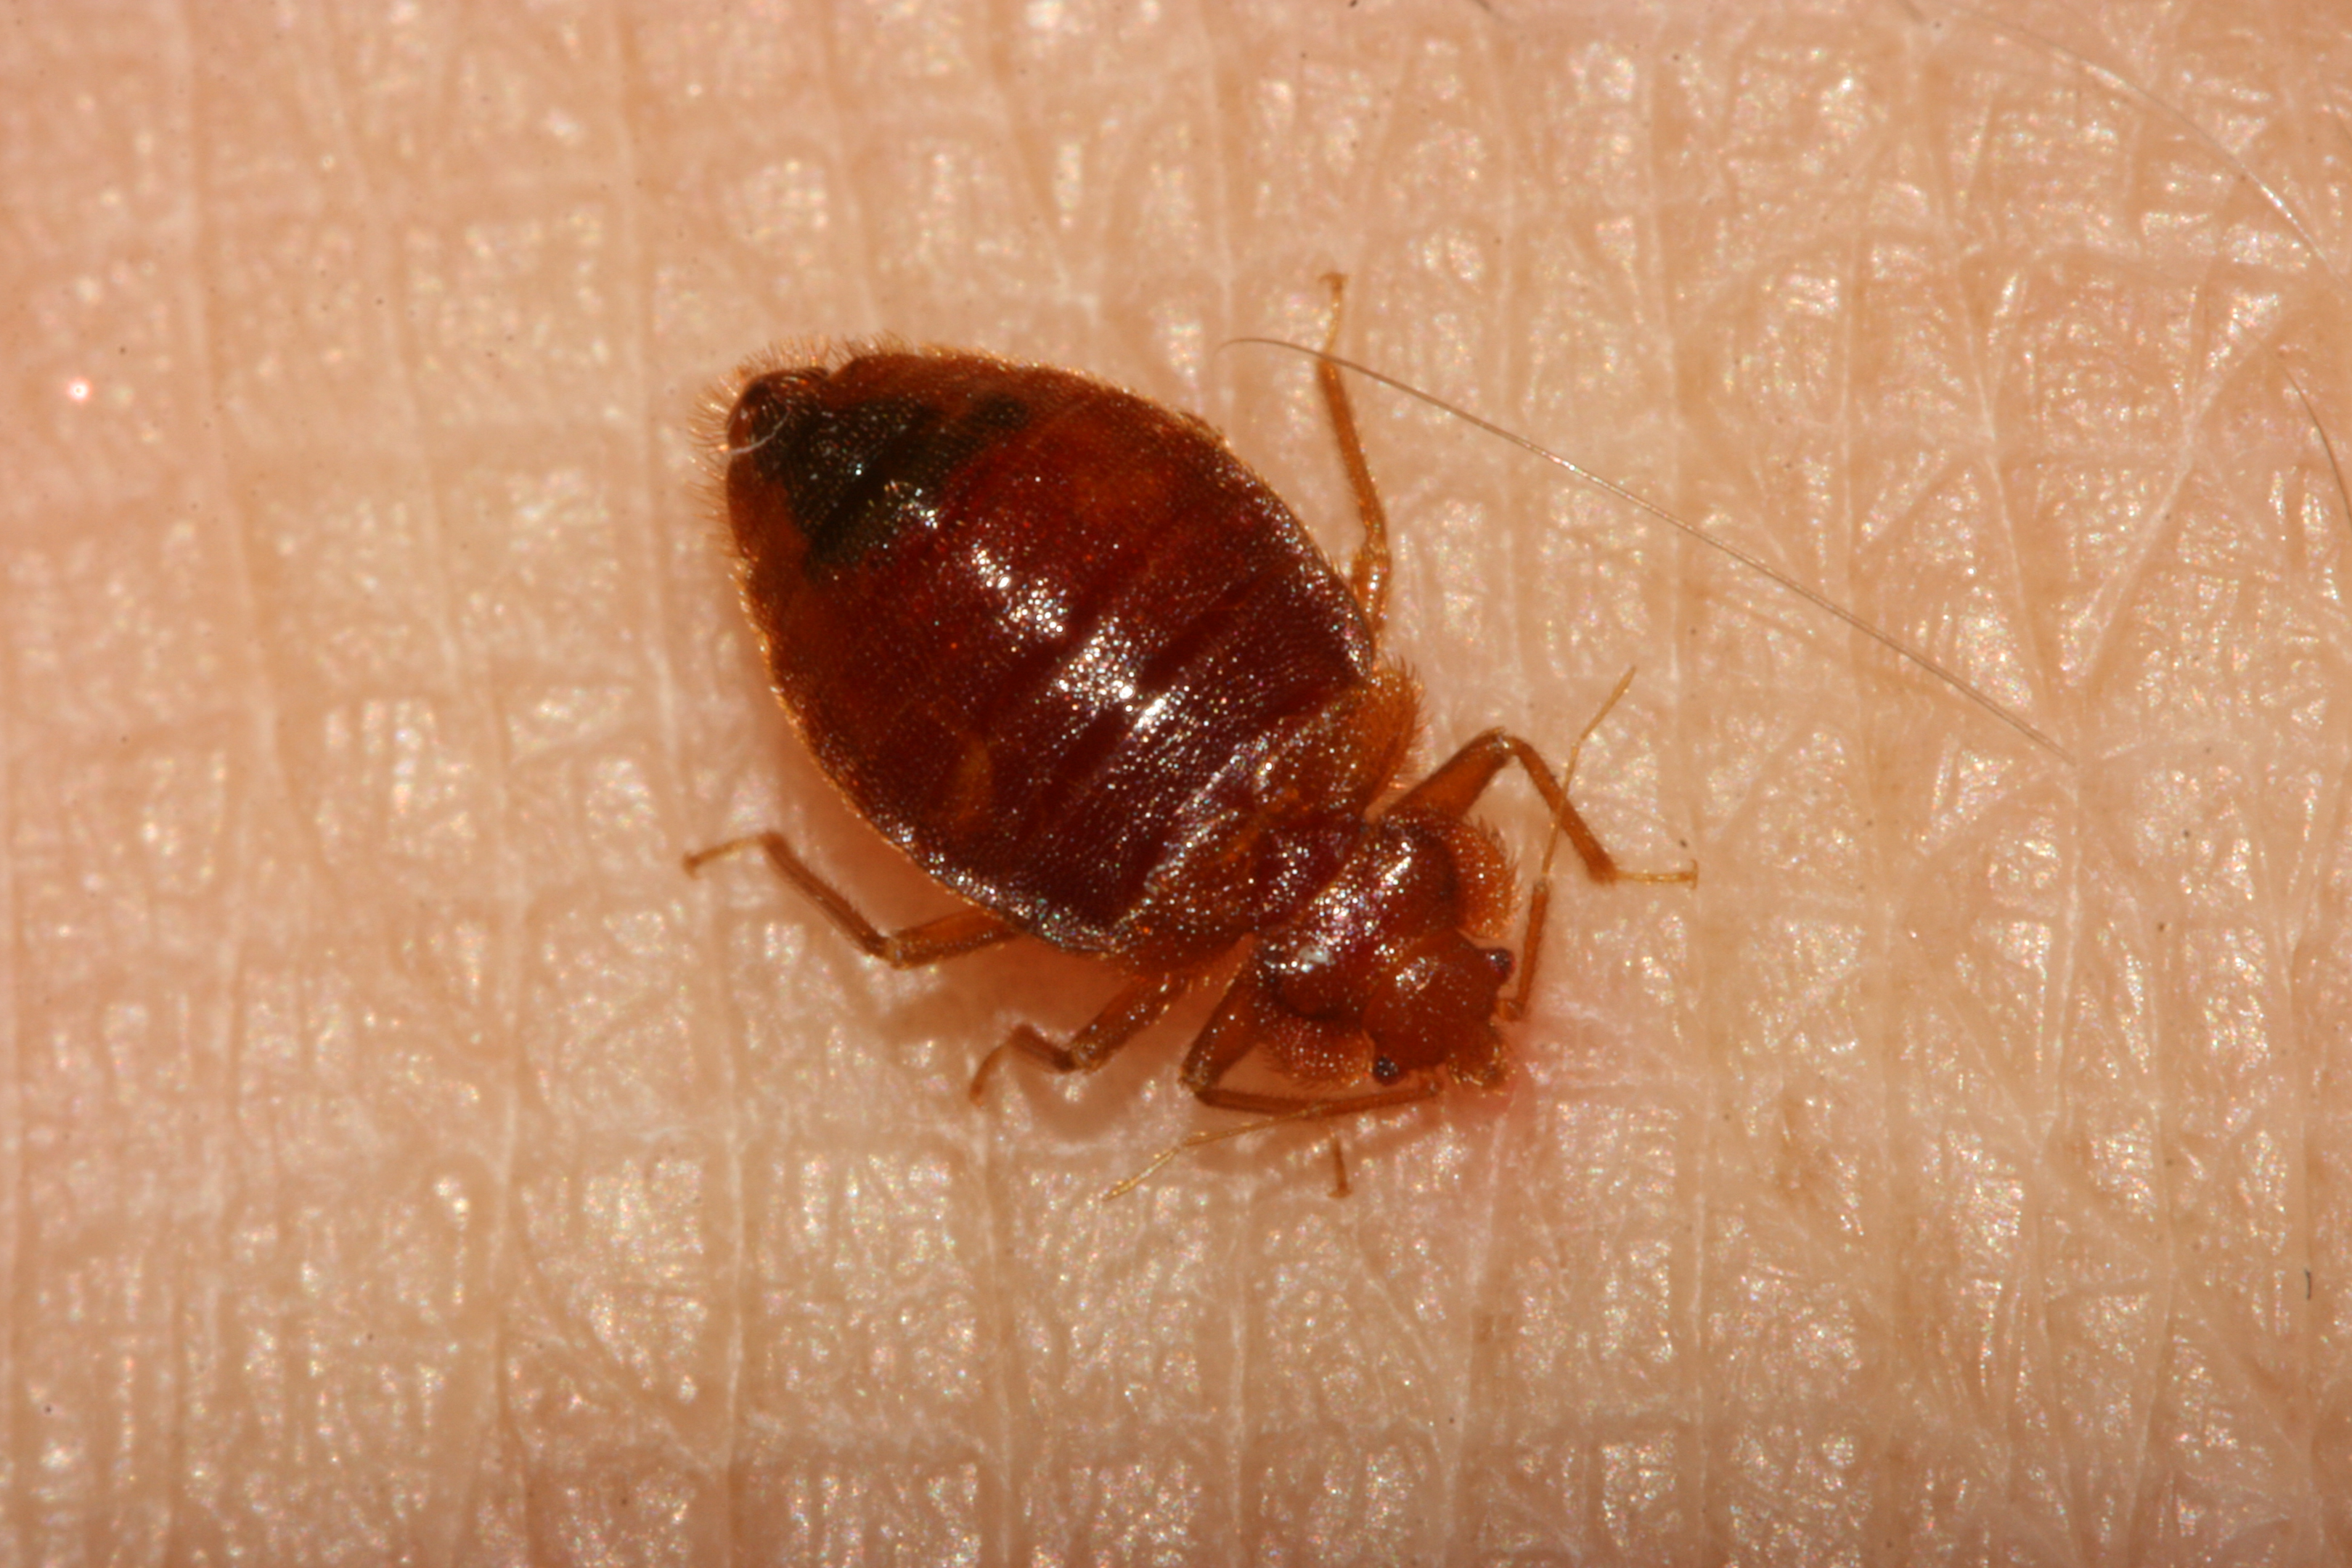 Avista Pest Control Everything You Need To Know About Bed Bug Casings